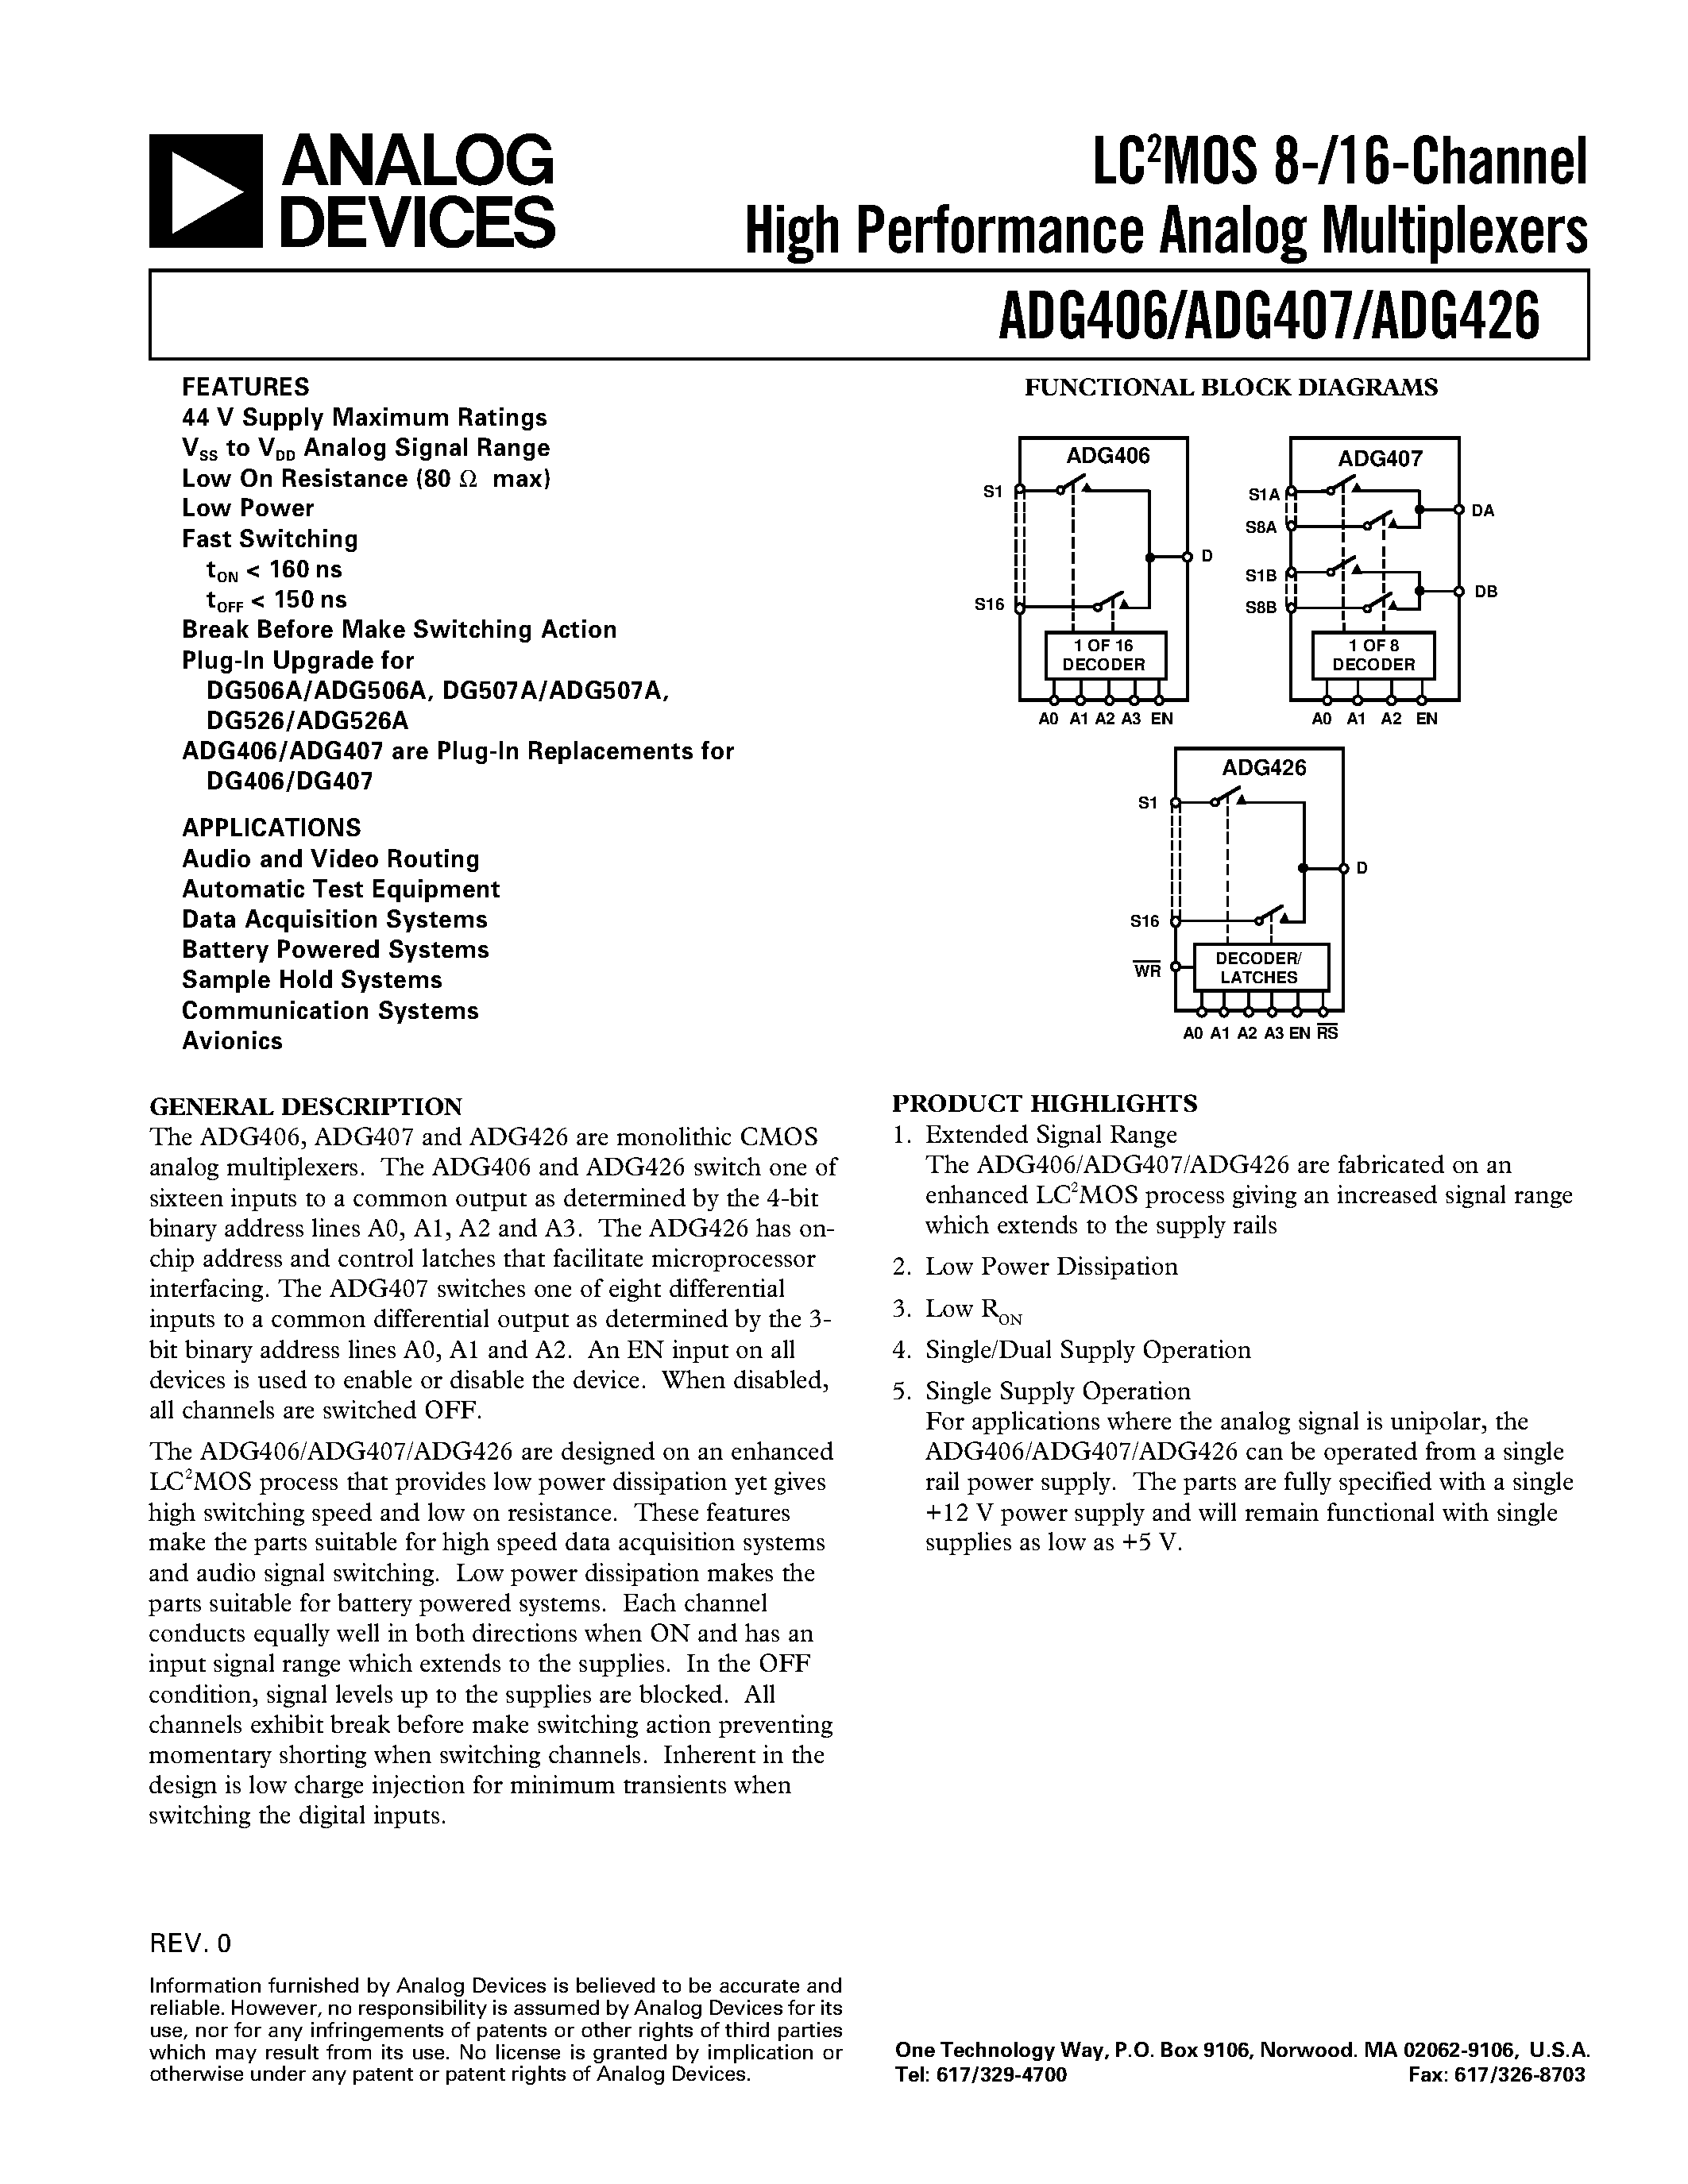 Datasheet ADG406BP - LC2MOS 8-/16-Channel High Performance Analog Multiplexers page 1